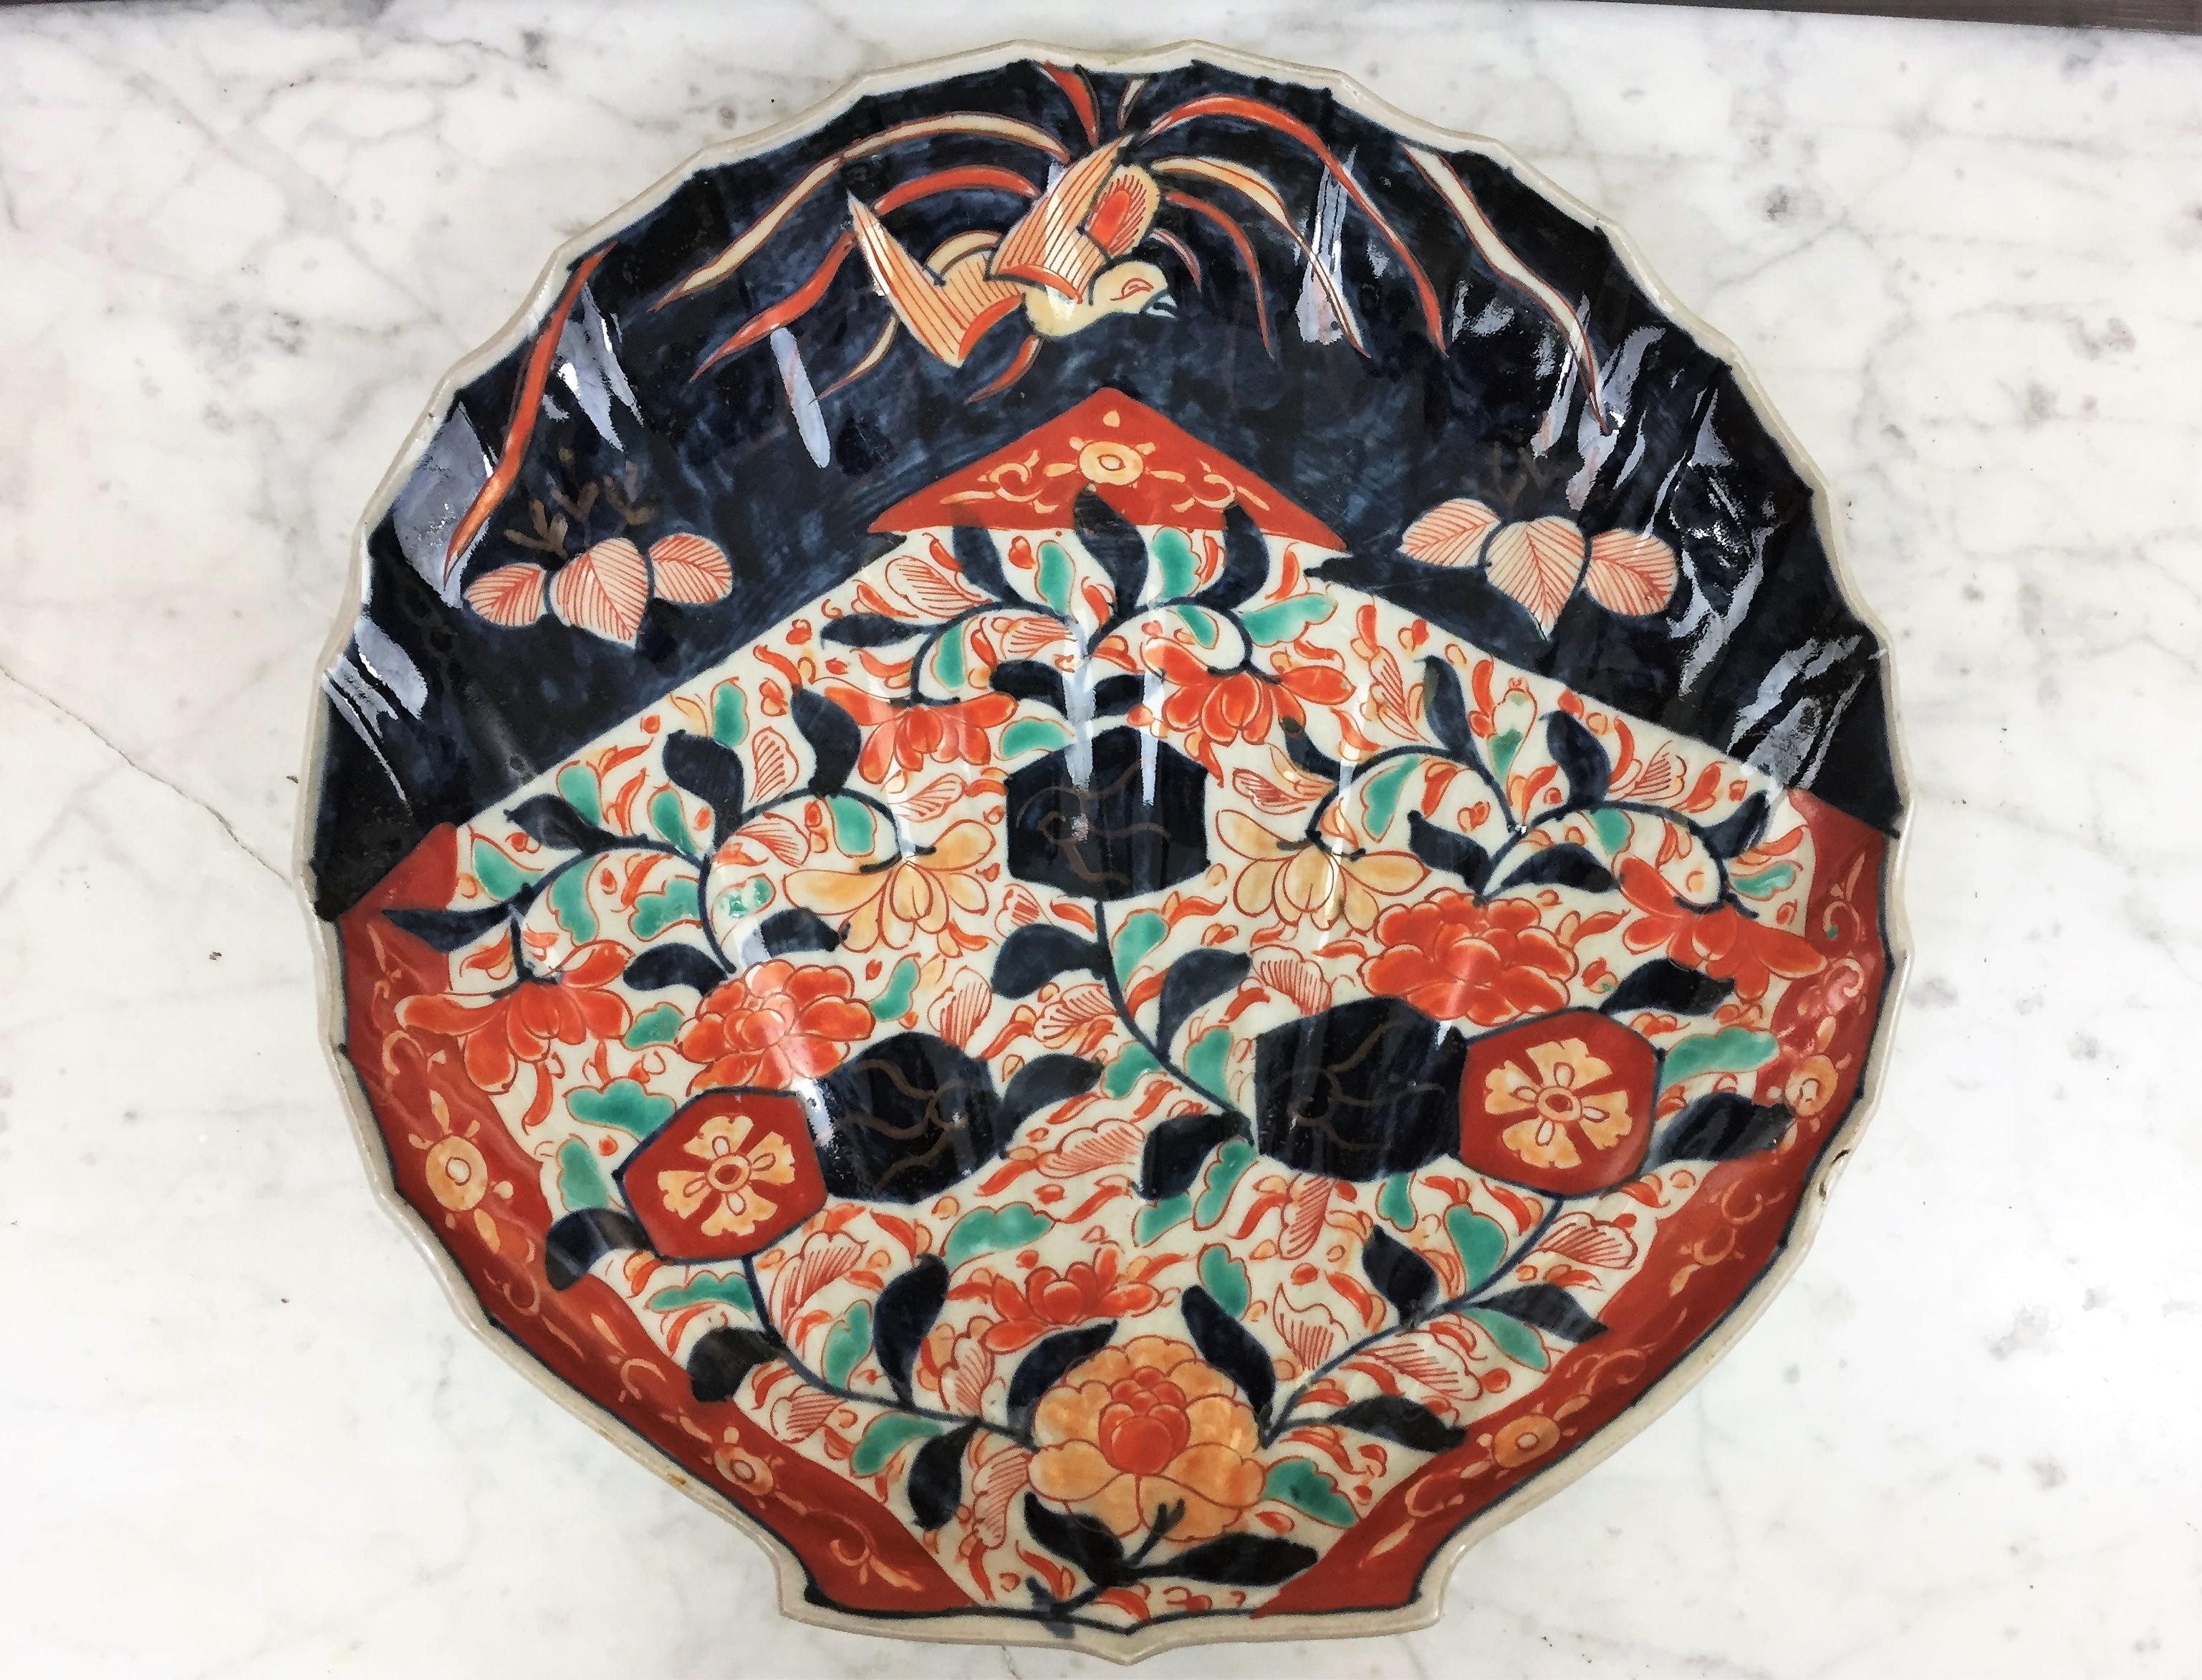 Plate with palms forming scallop shell in Imari porcelain. Decor of birds and flowers, blue red orange and turquoise.
Japan.
19th century.